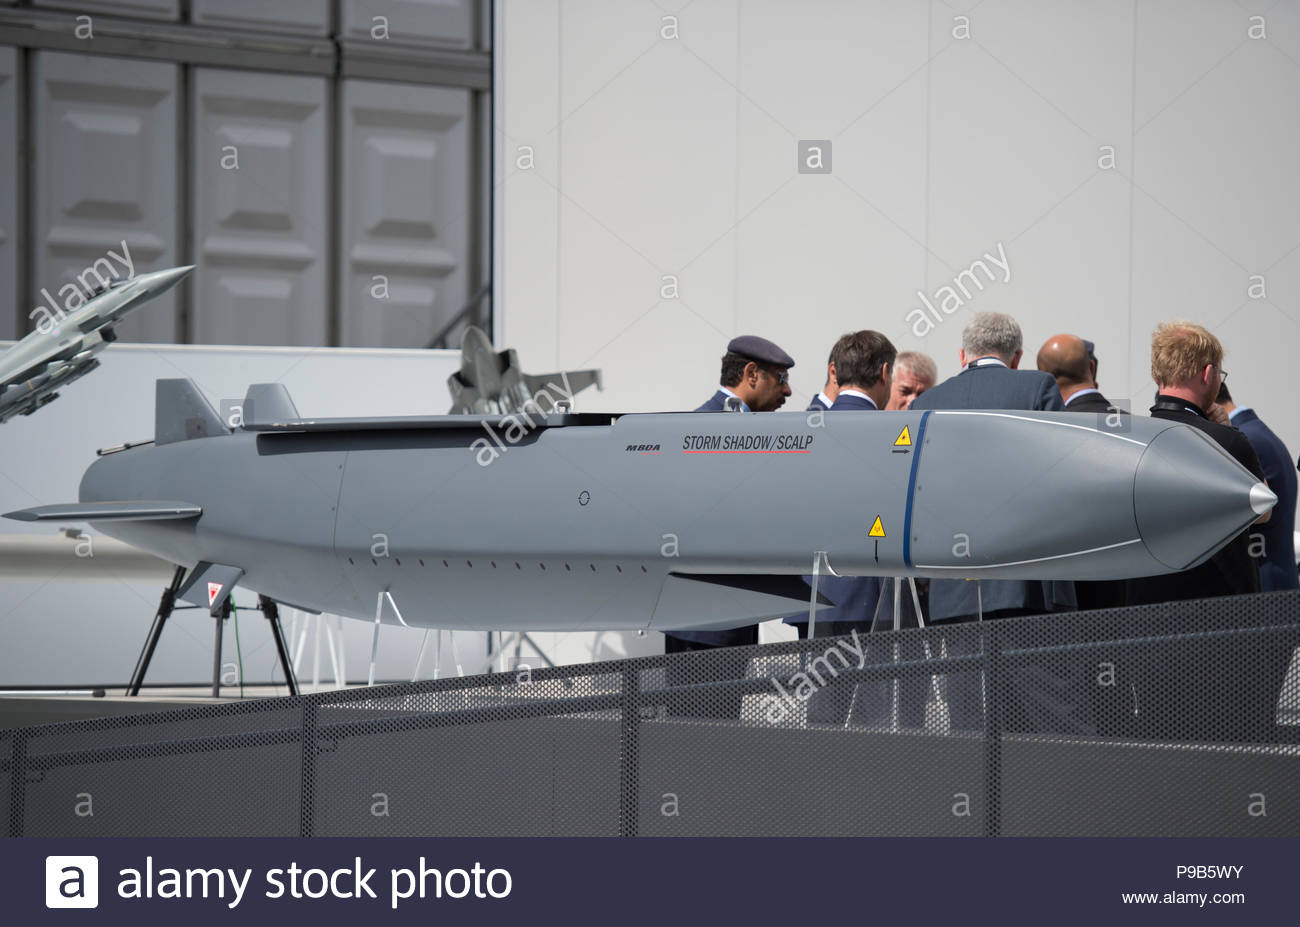 farnborough-hampshire-uk-17-july-2018-busy-second-day-of-the-biennial-farnborough-international-trade-airshow-fia2018-open-to-aerospace-and-defence-buyers-and-sellers-credit-malcolm-parkalamy-live-news-P9B5WY.jpg